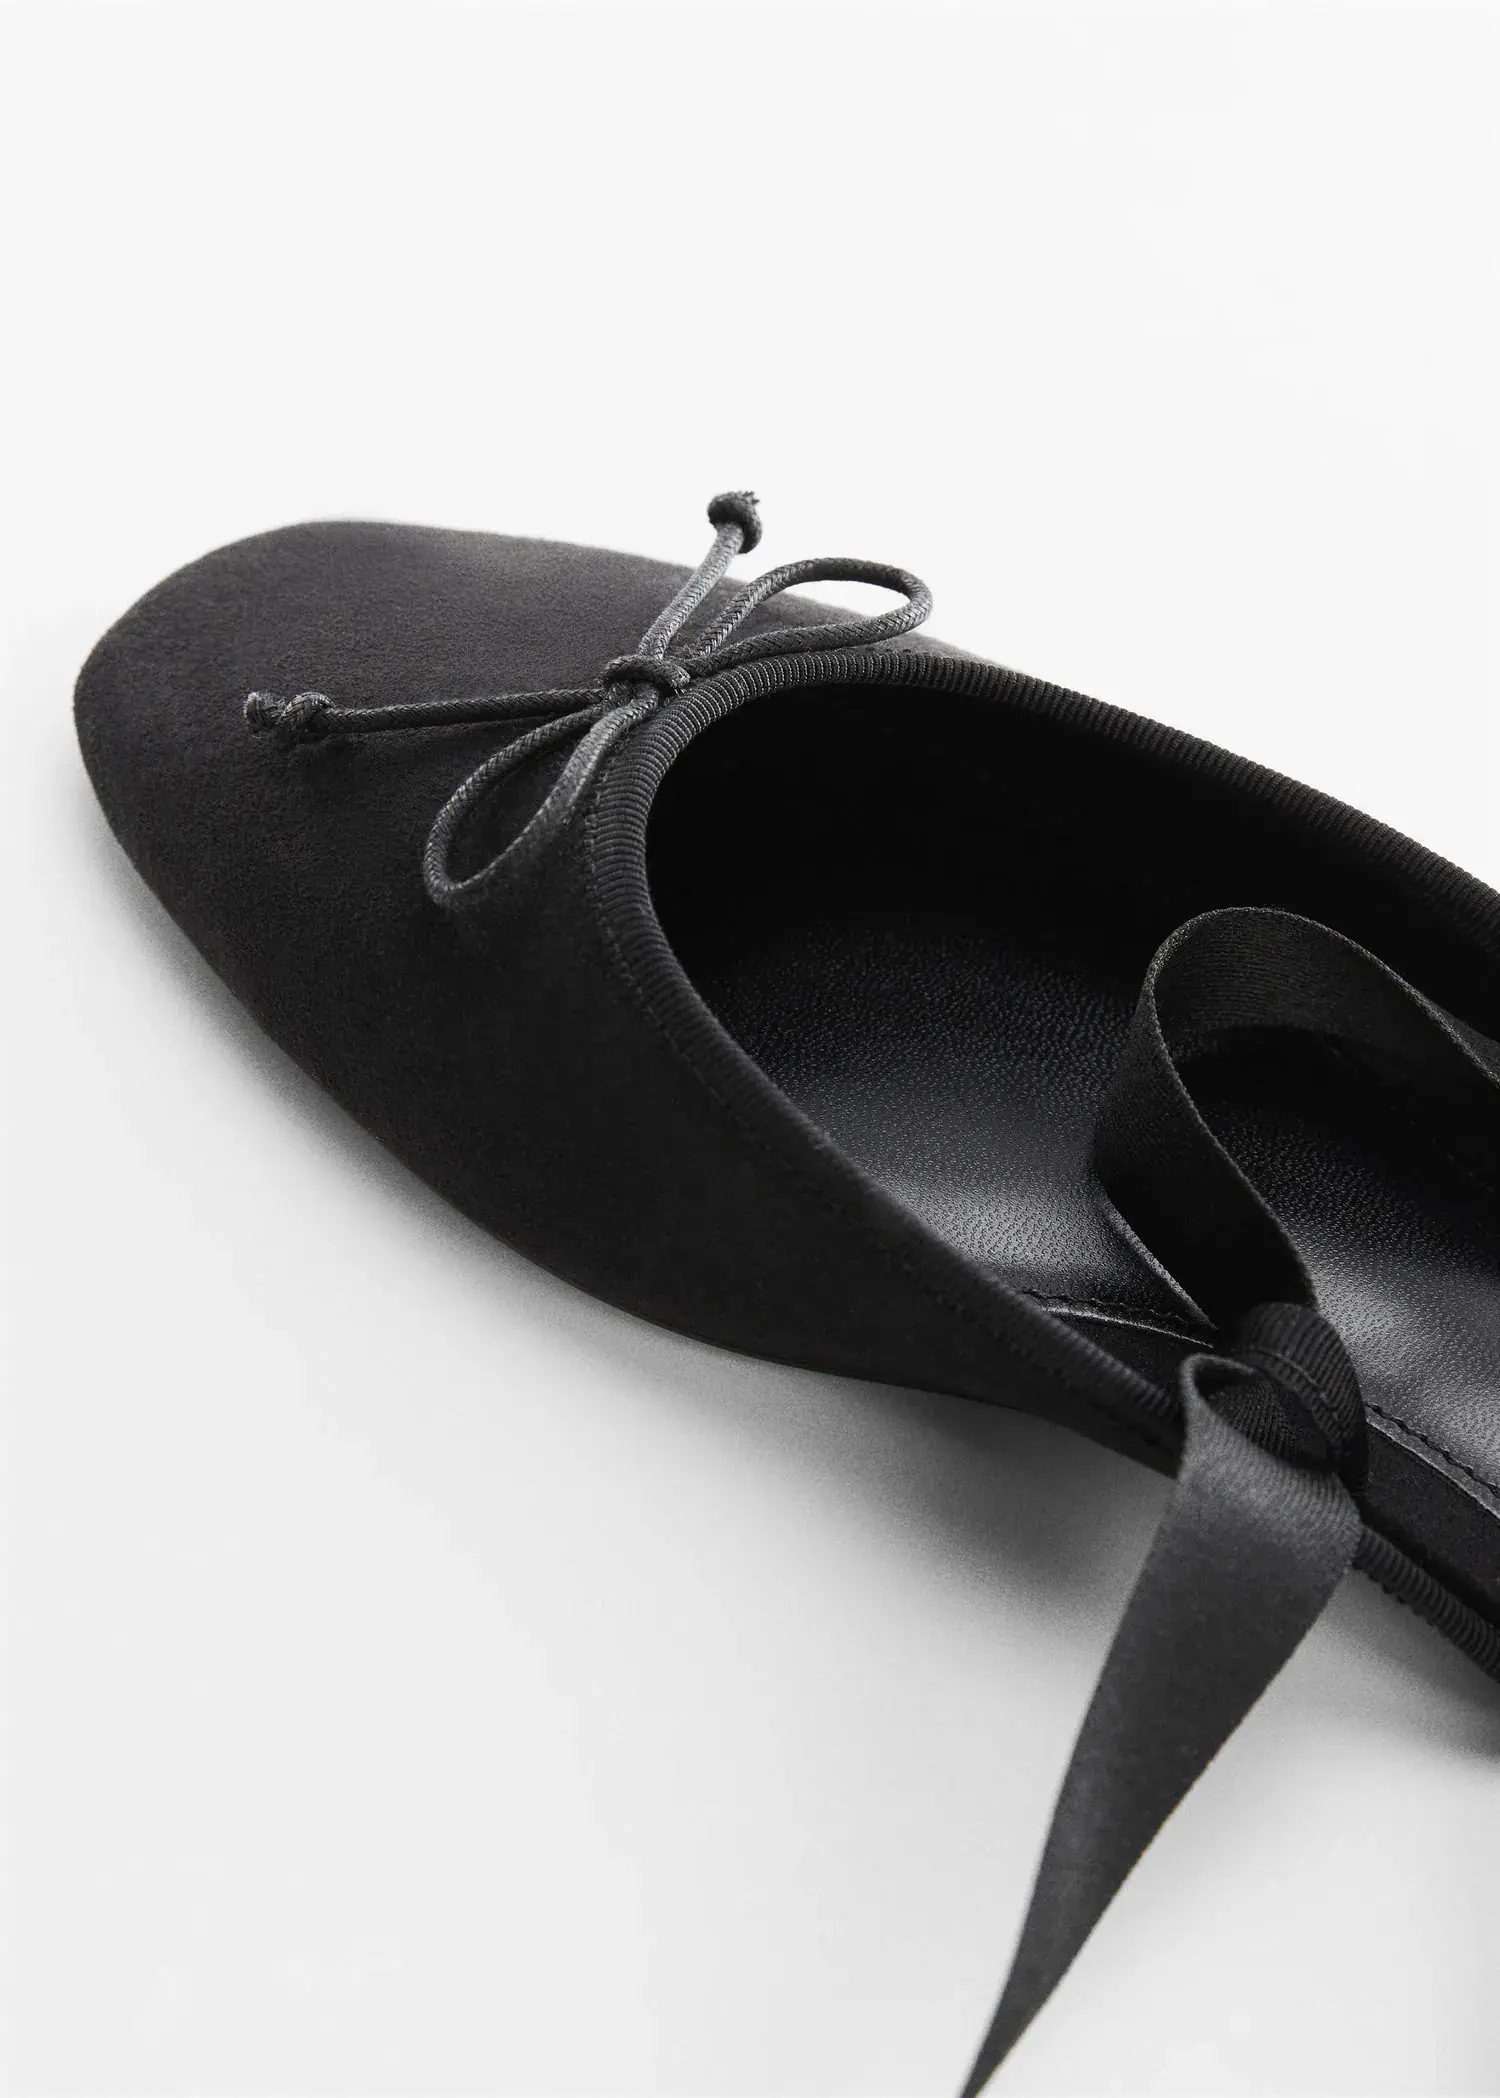 Mango Lace-up ballerinas. a pair of black shoes on a white surface. 